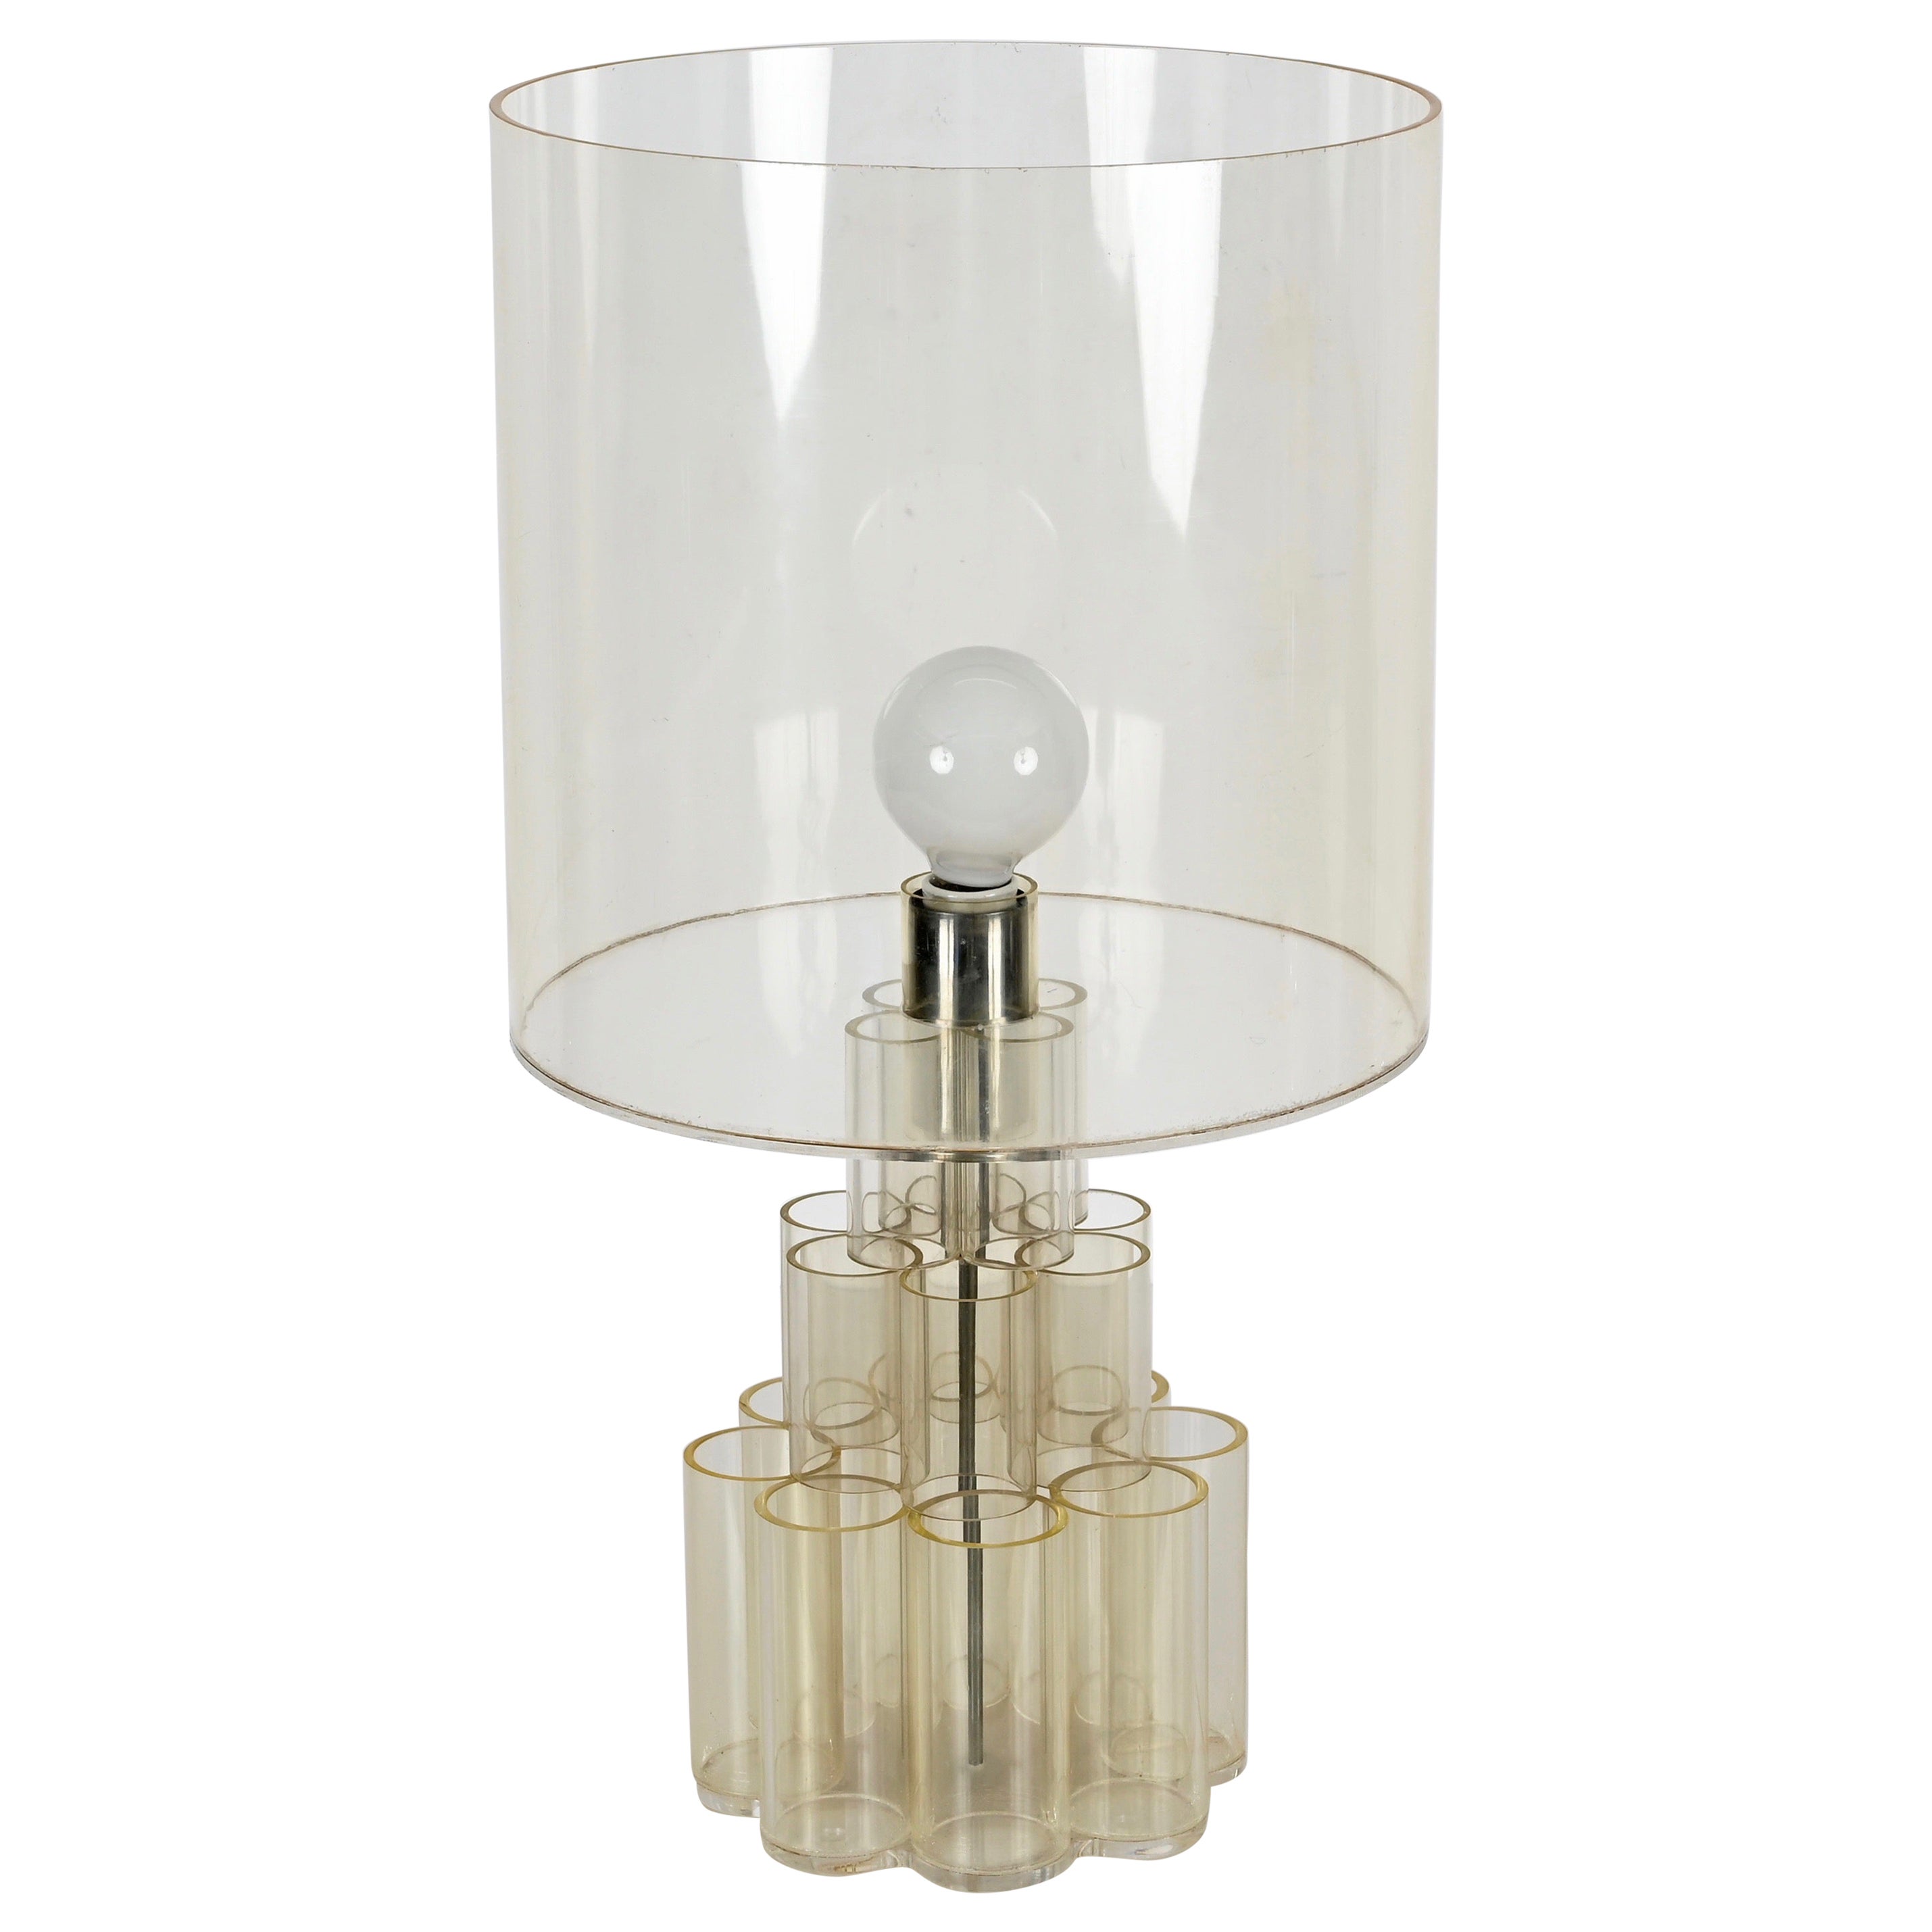 Mid-Century Modern Table Lamp in Lucite Plexiglass, Panton Style, Italy, 1970s For Sale